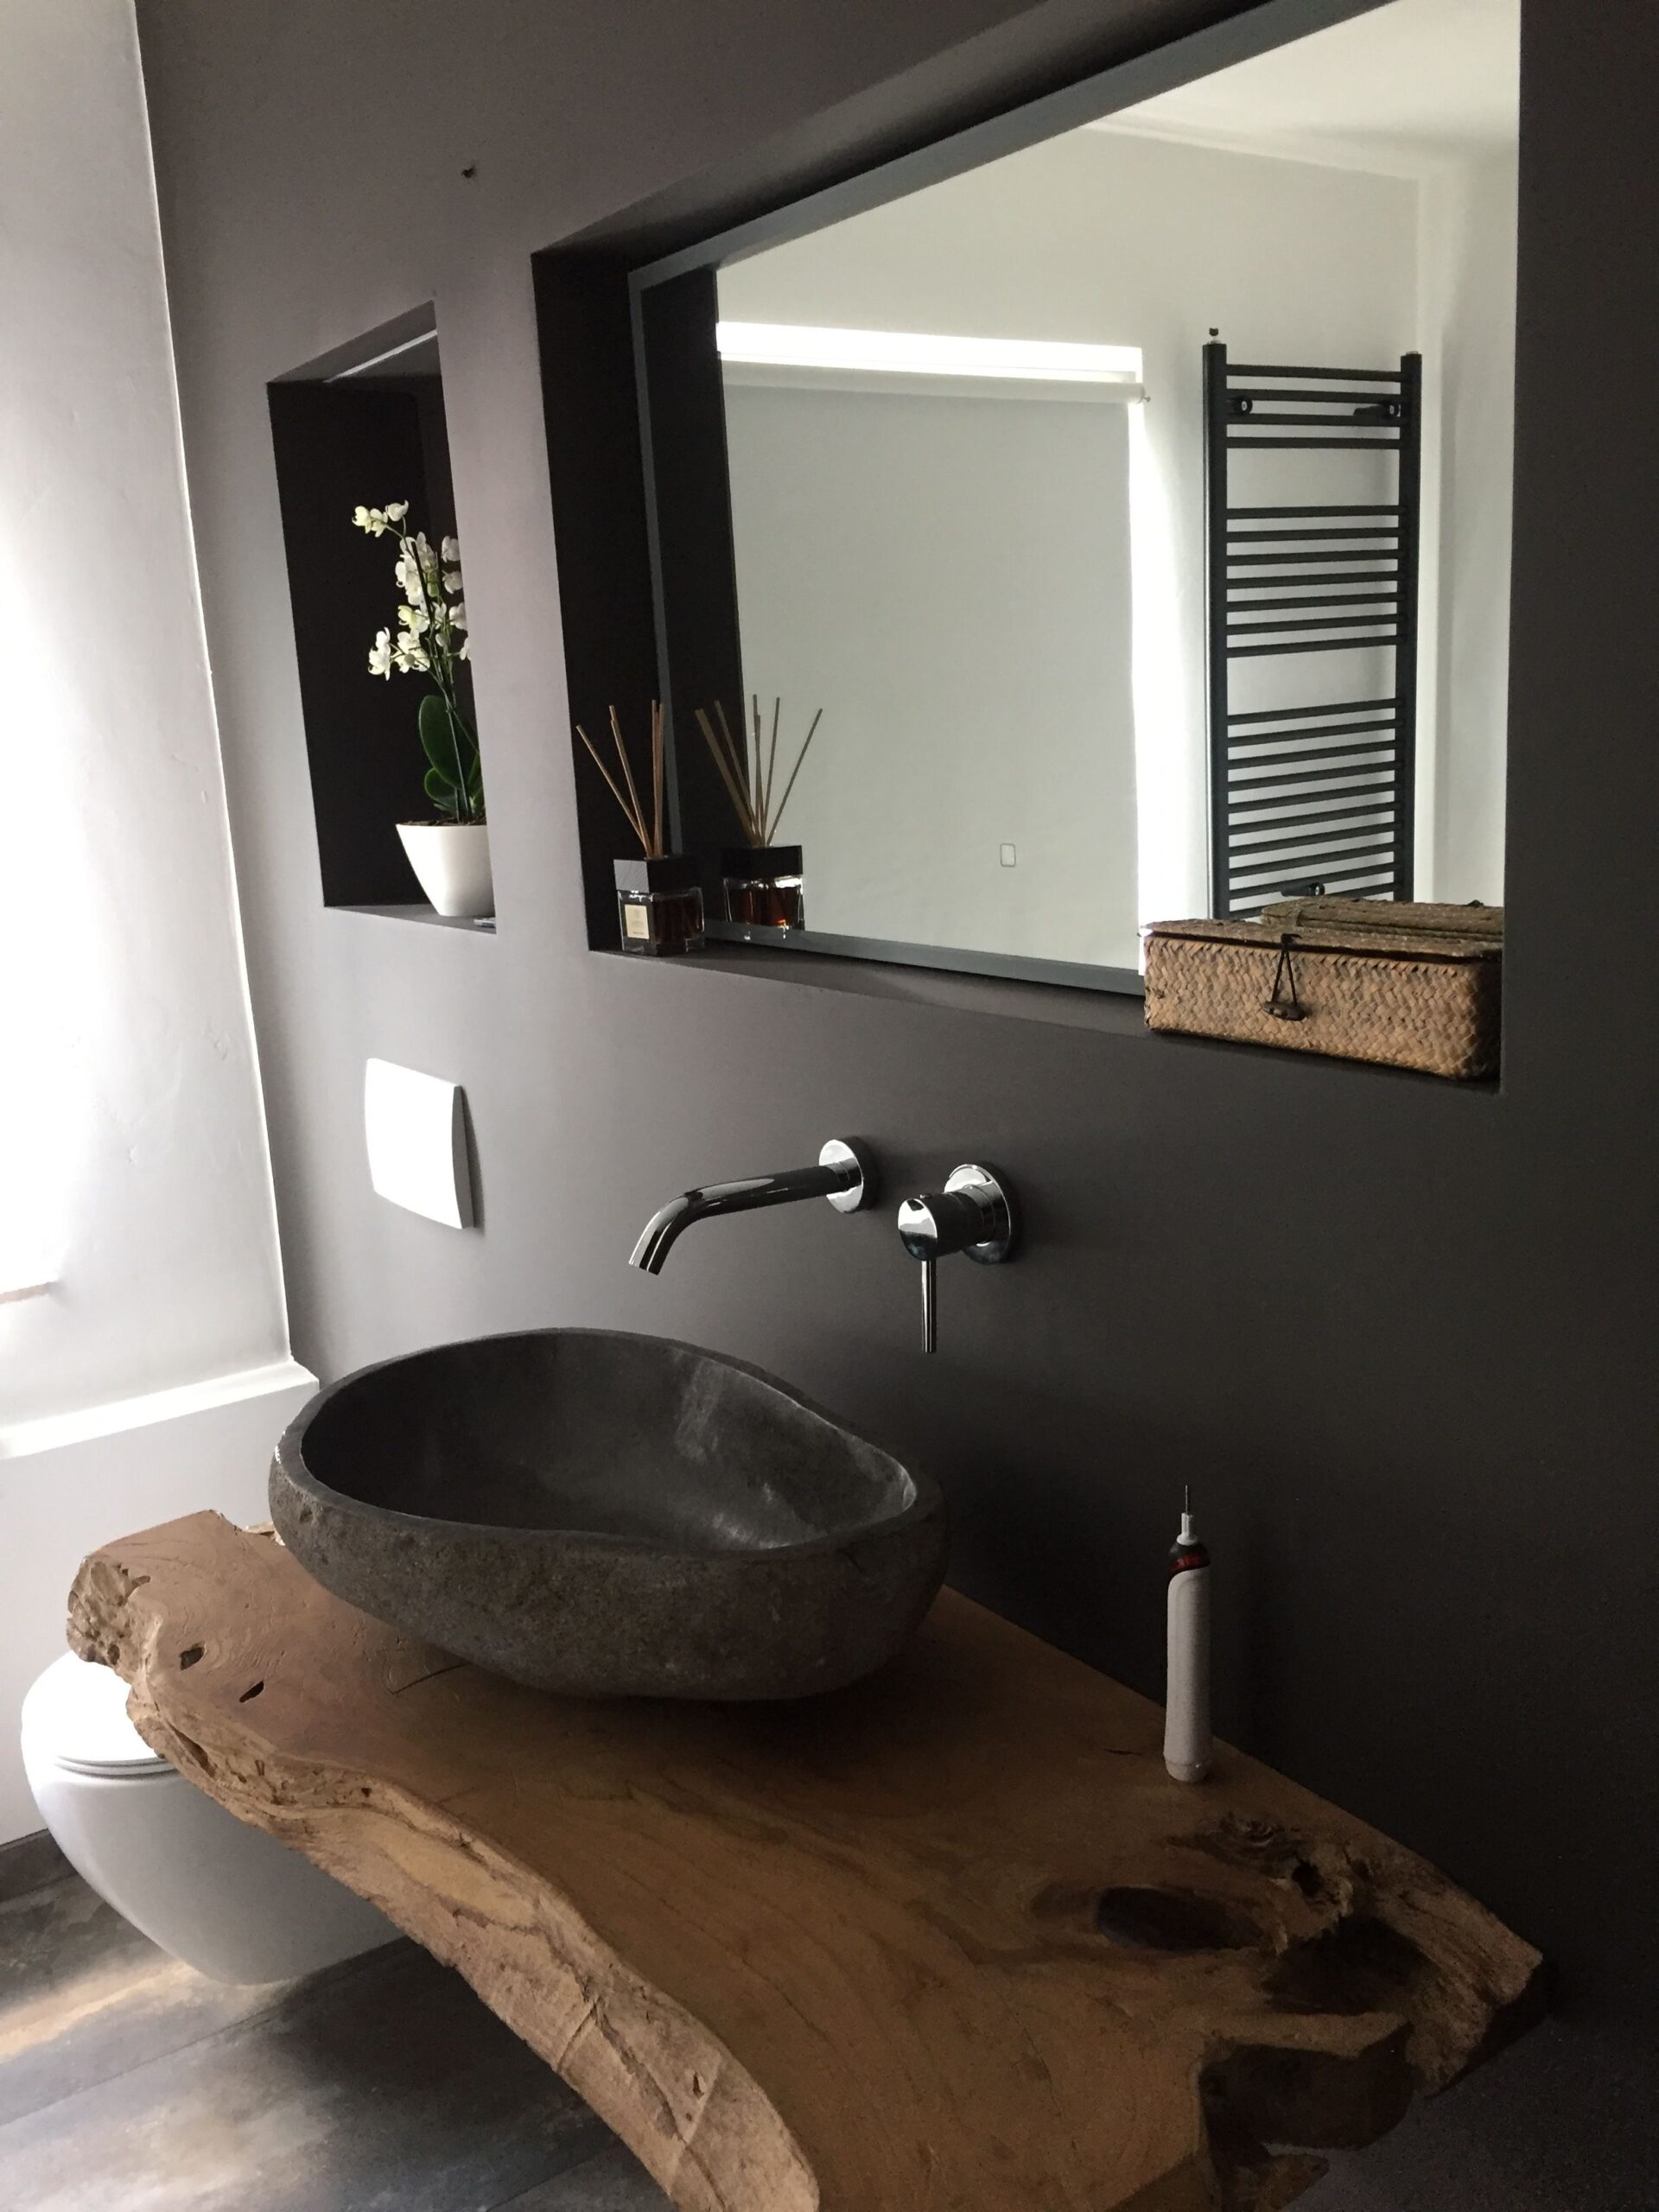 elegant and rustic upscale bathroom with thick live edge plank counter, carved stone sink, black wall colour and light and bright shower niche